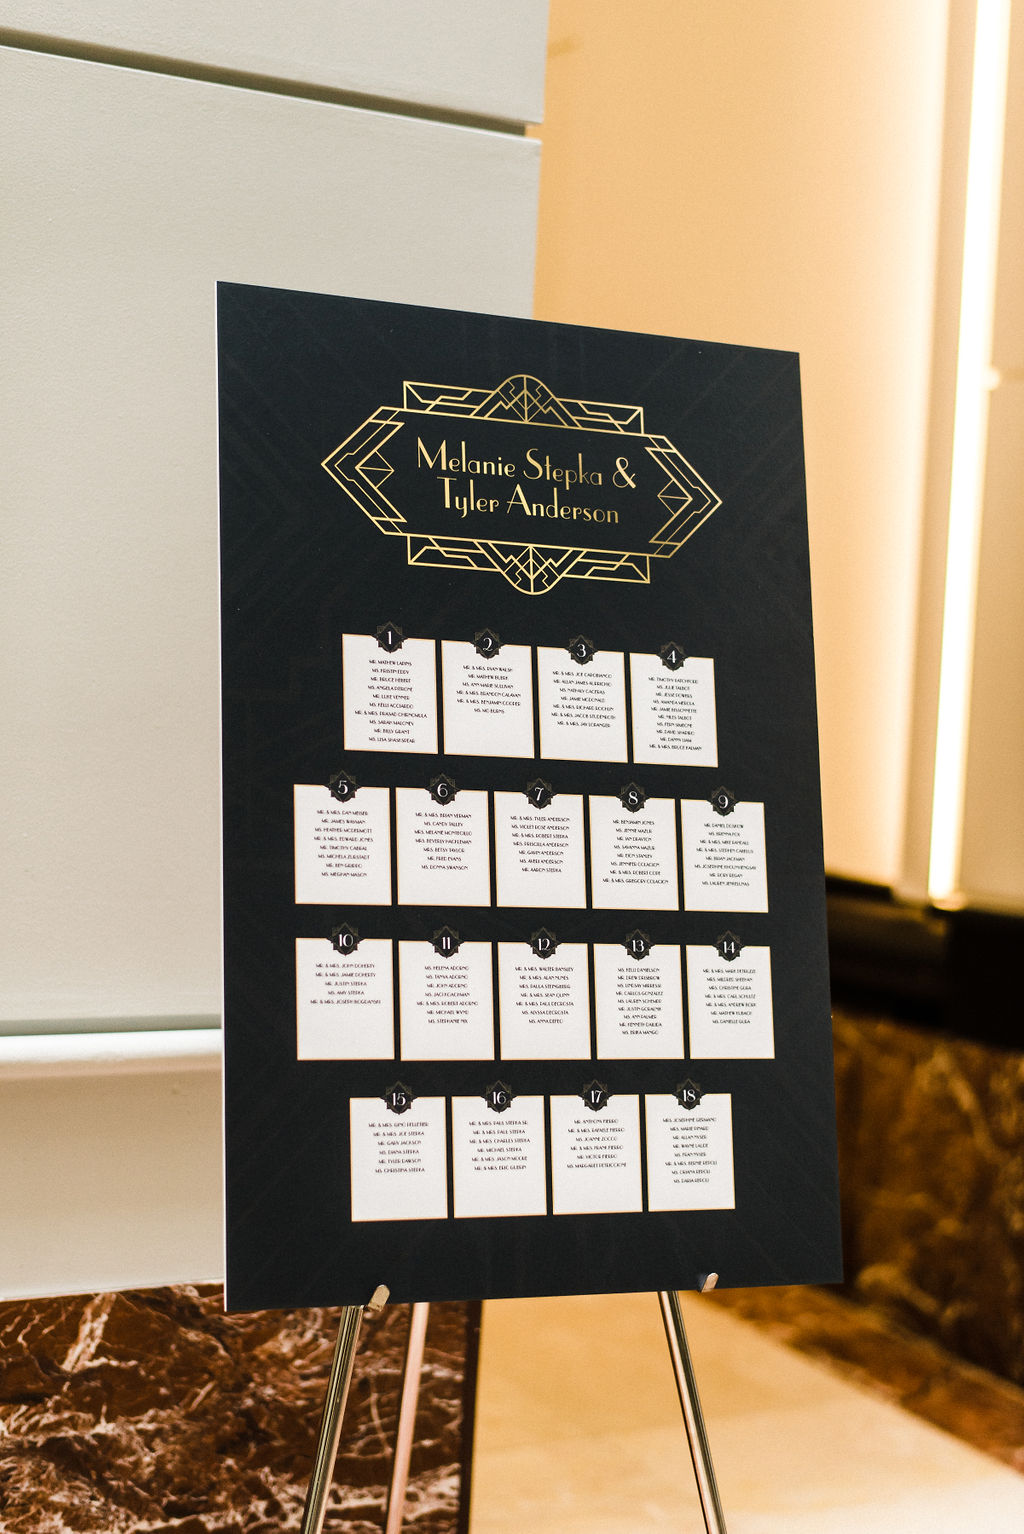 Great Gatsby themed wedding chart for Melanie &amp; Tyler Anderson's wedding - Pearl Weddings &amp; Events